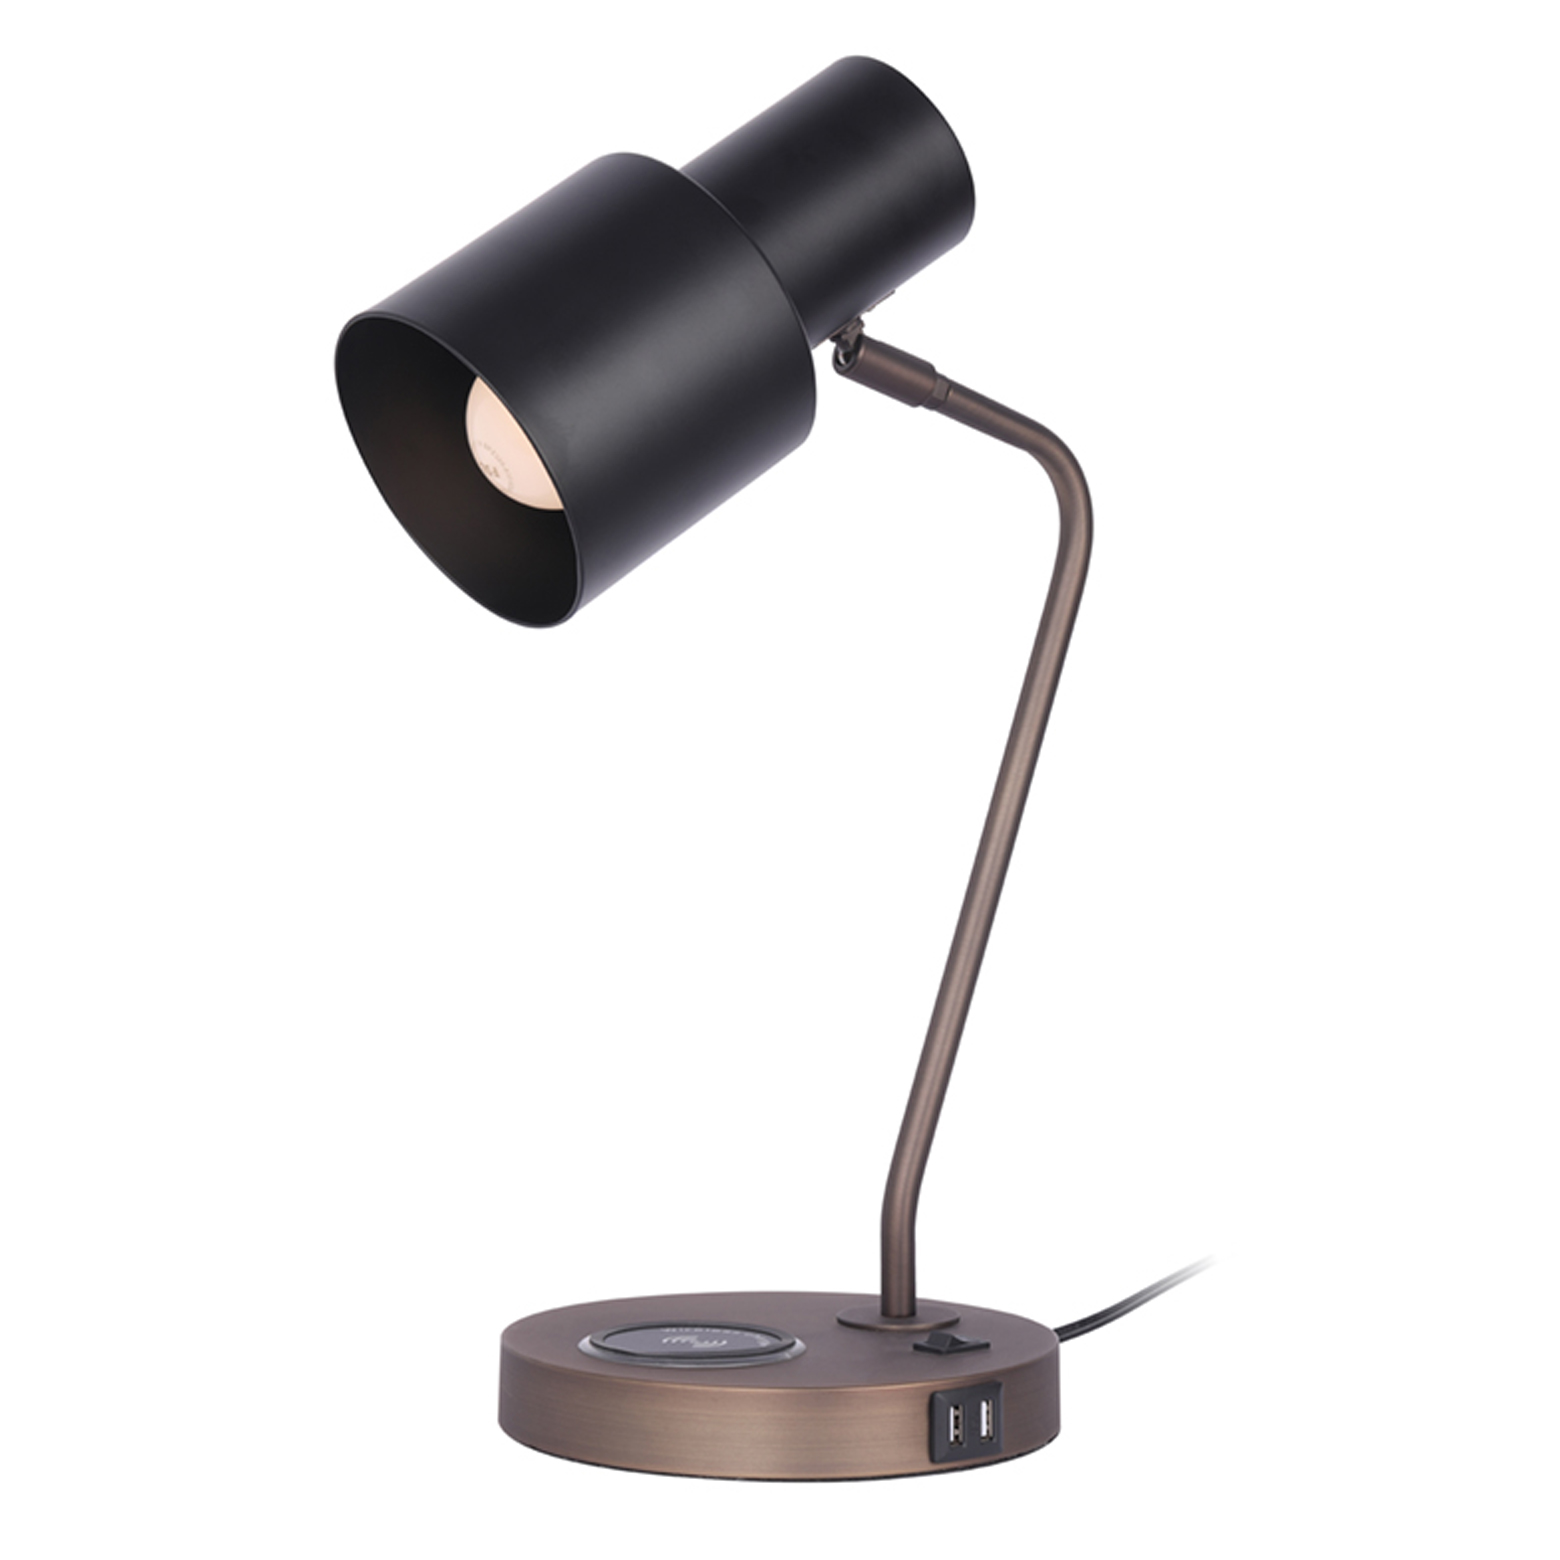 Enhance Your Office Space with a Stylish and Functional Floor Lamp